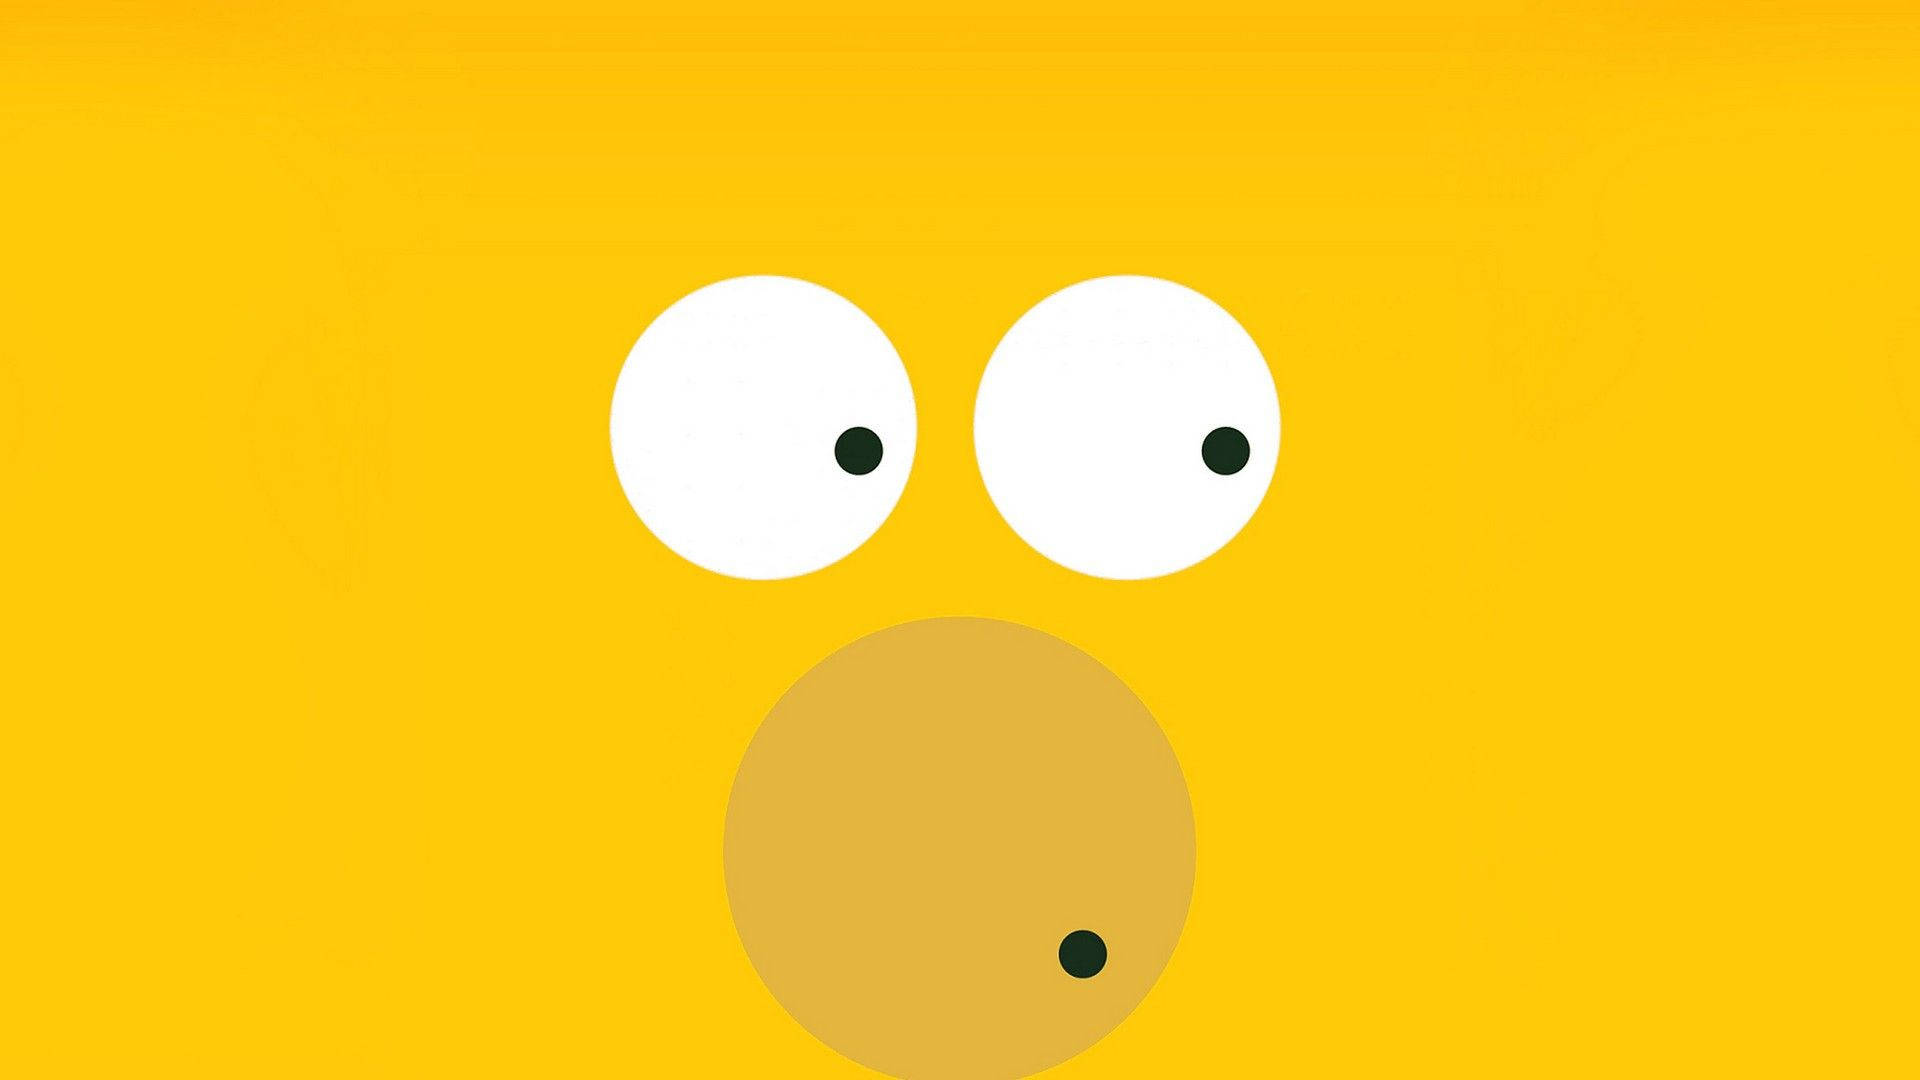 Simpsons Face Cute Yellow Graphic Background